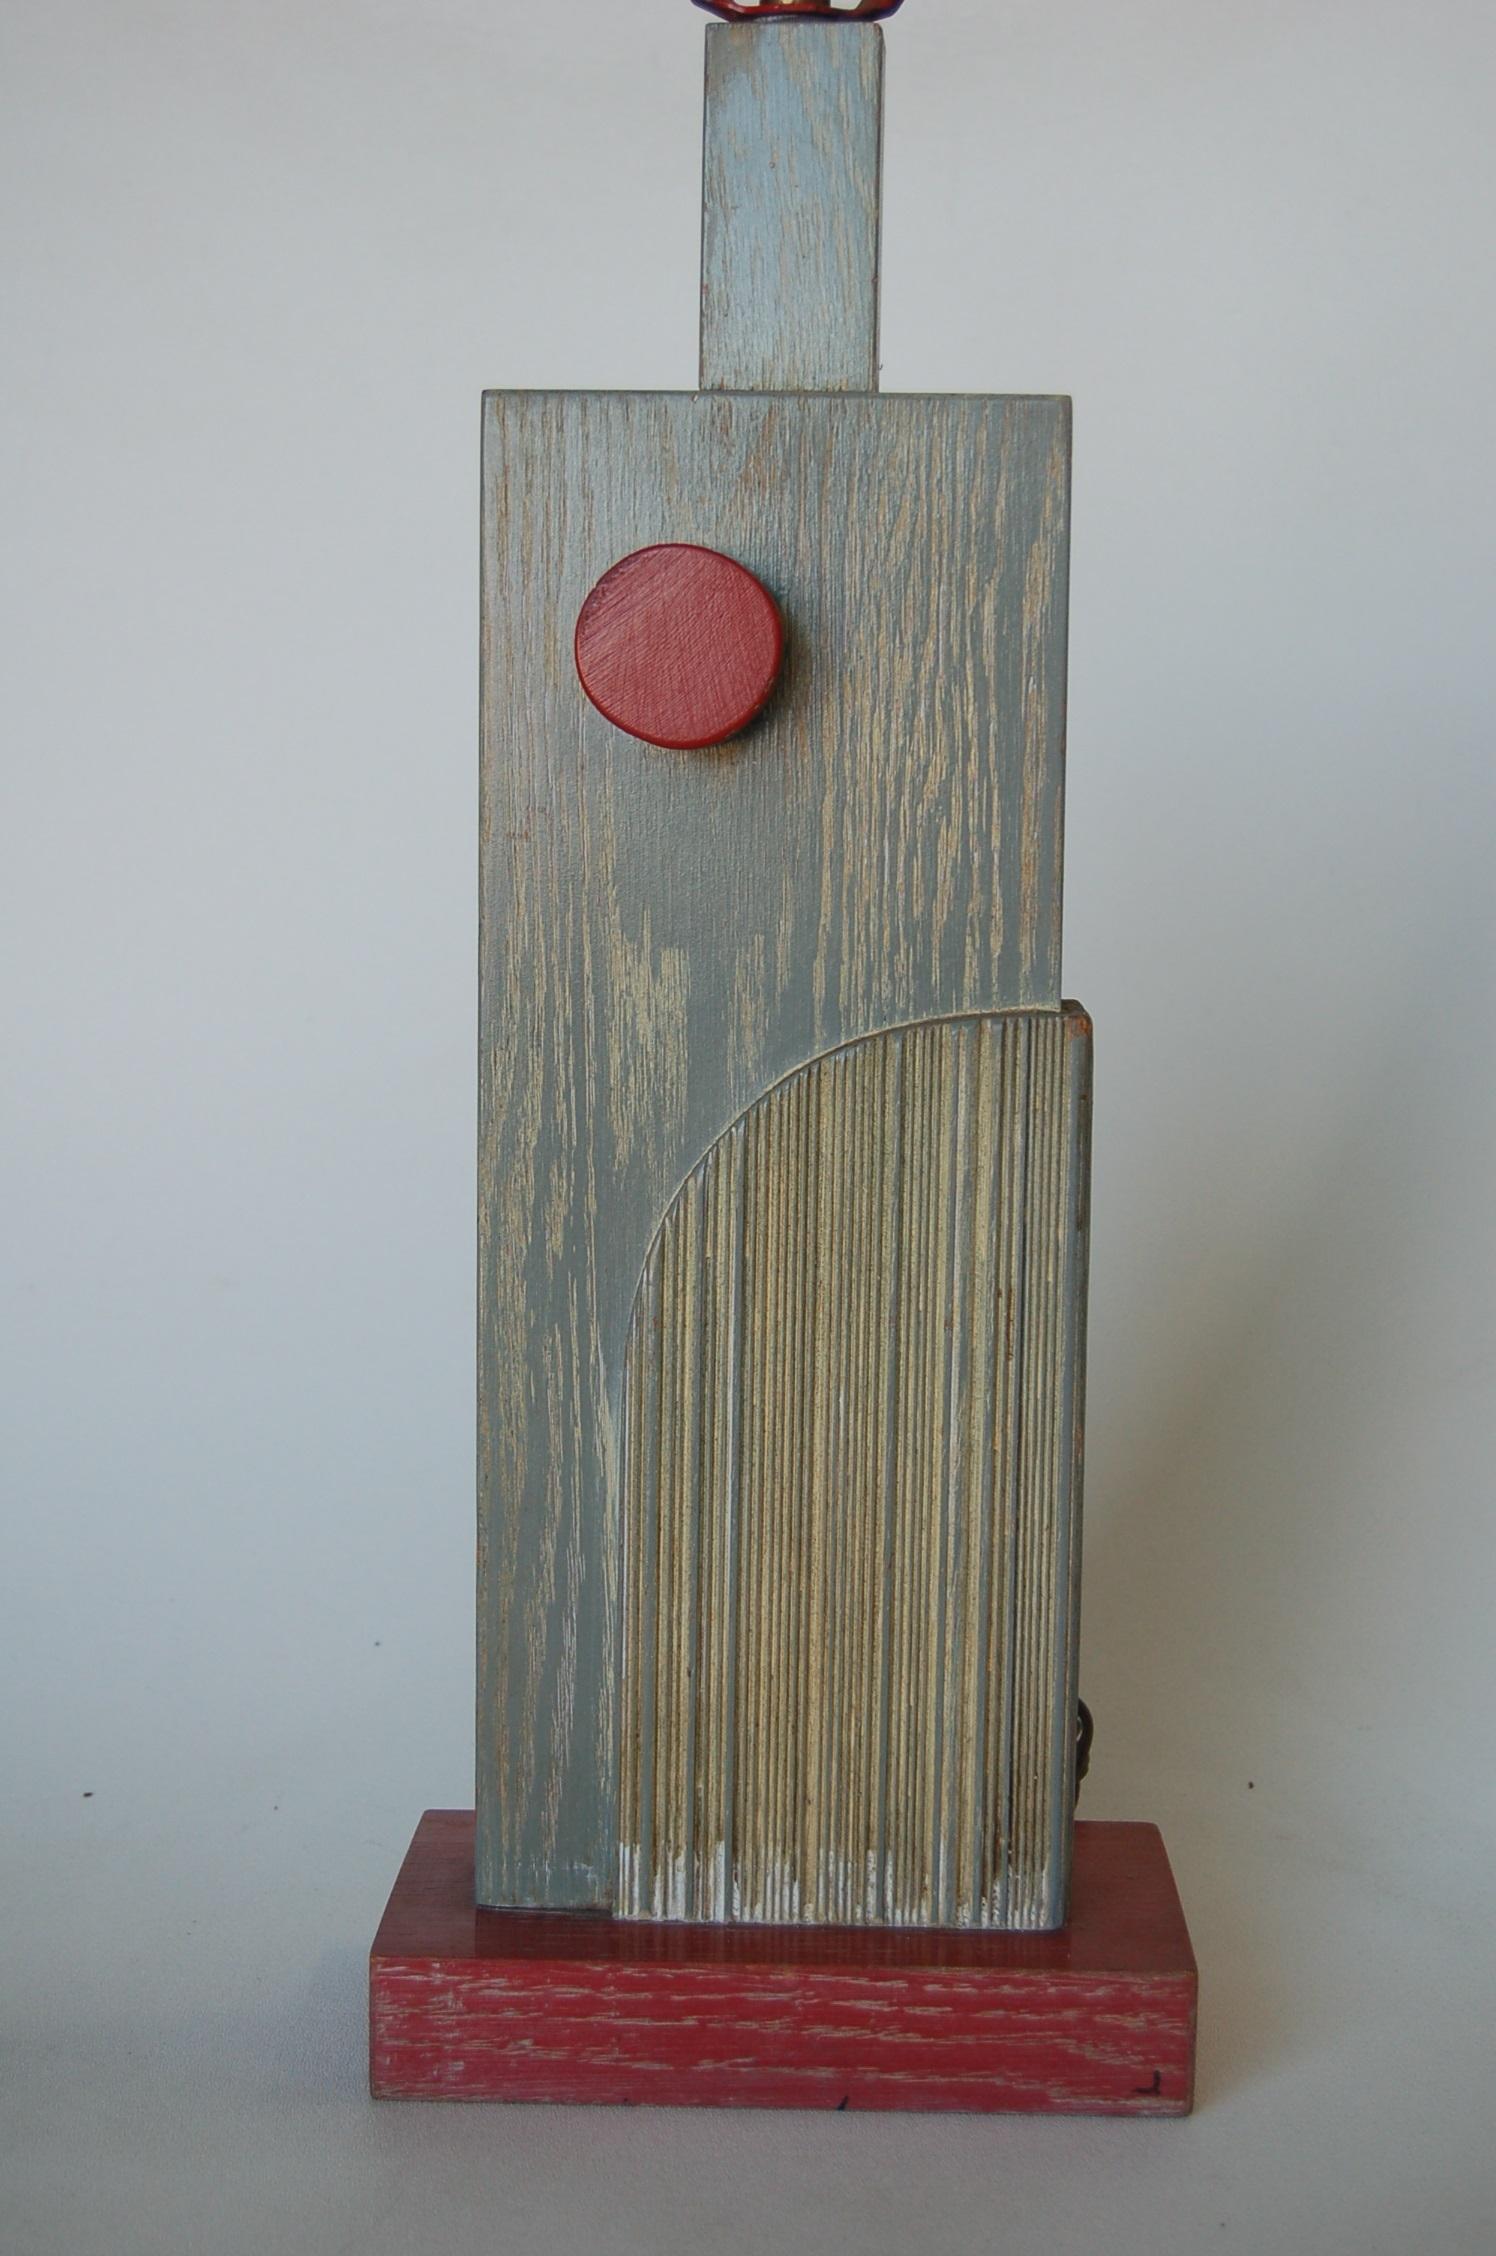 Red and gray wood Googie table lamp by Levinton.

Measures: 7